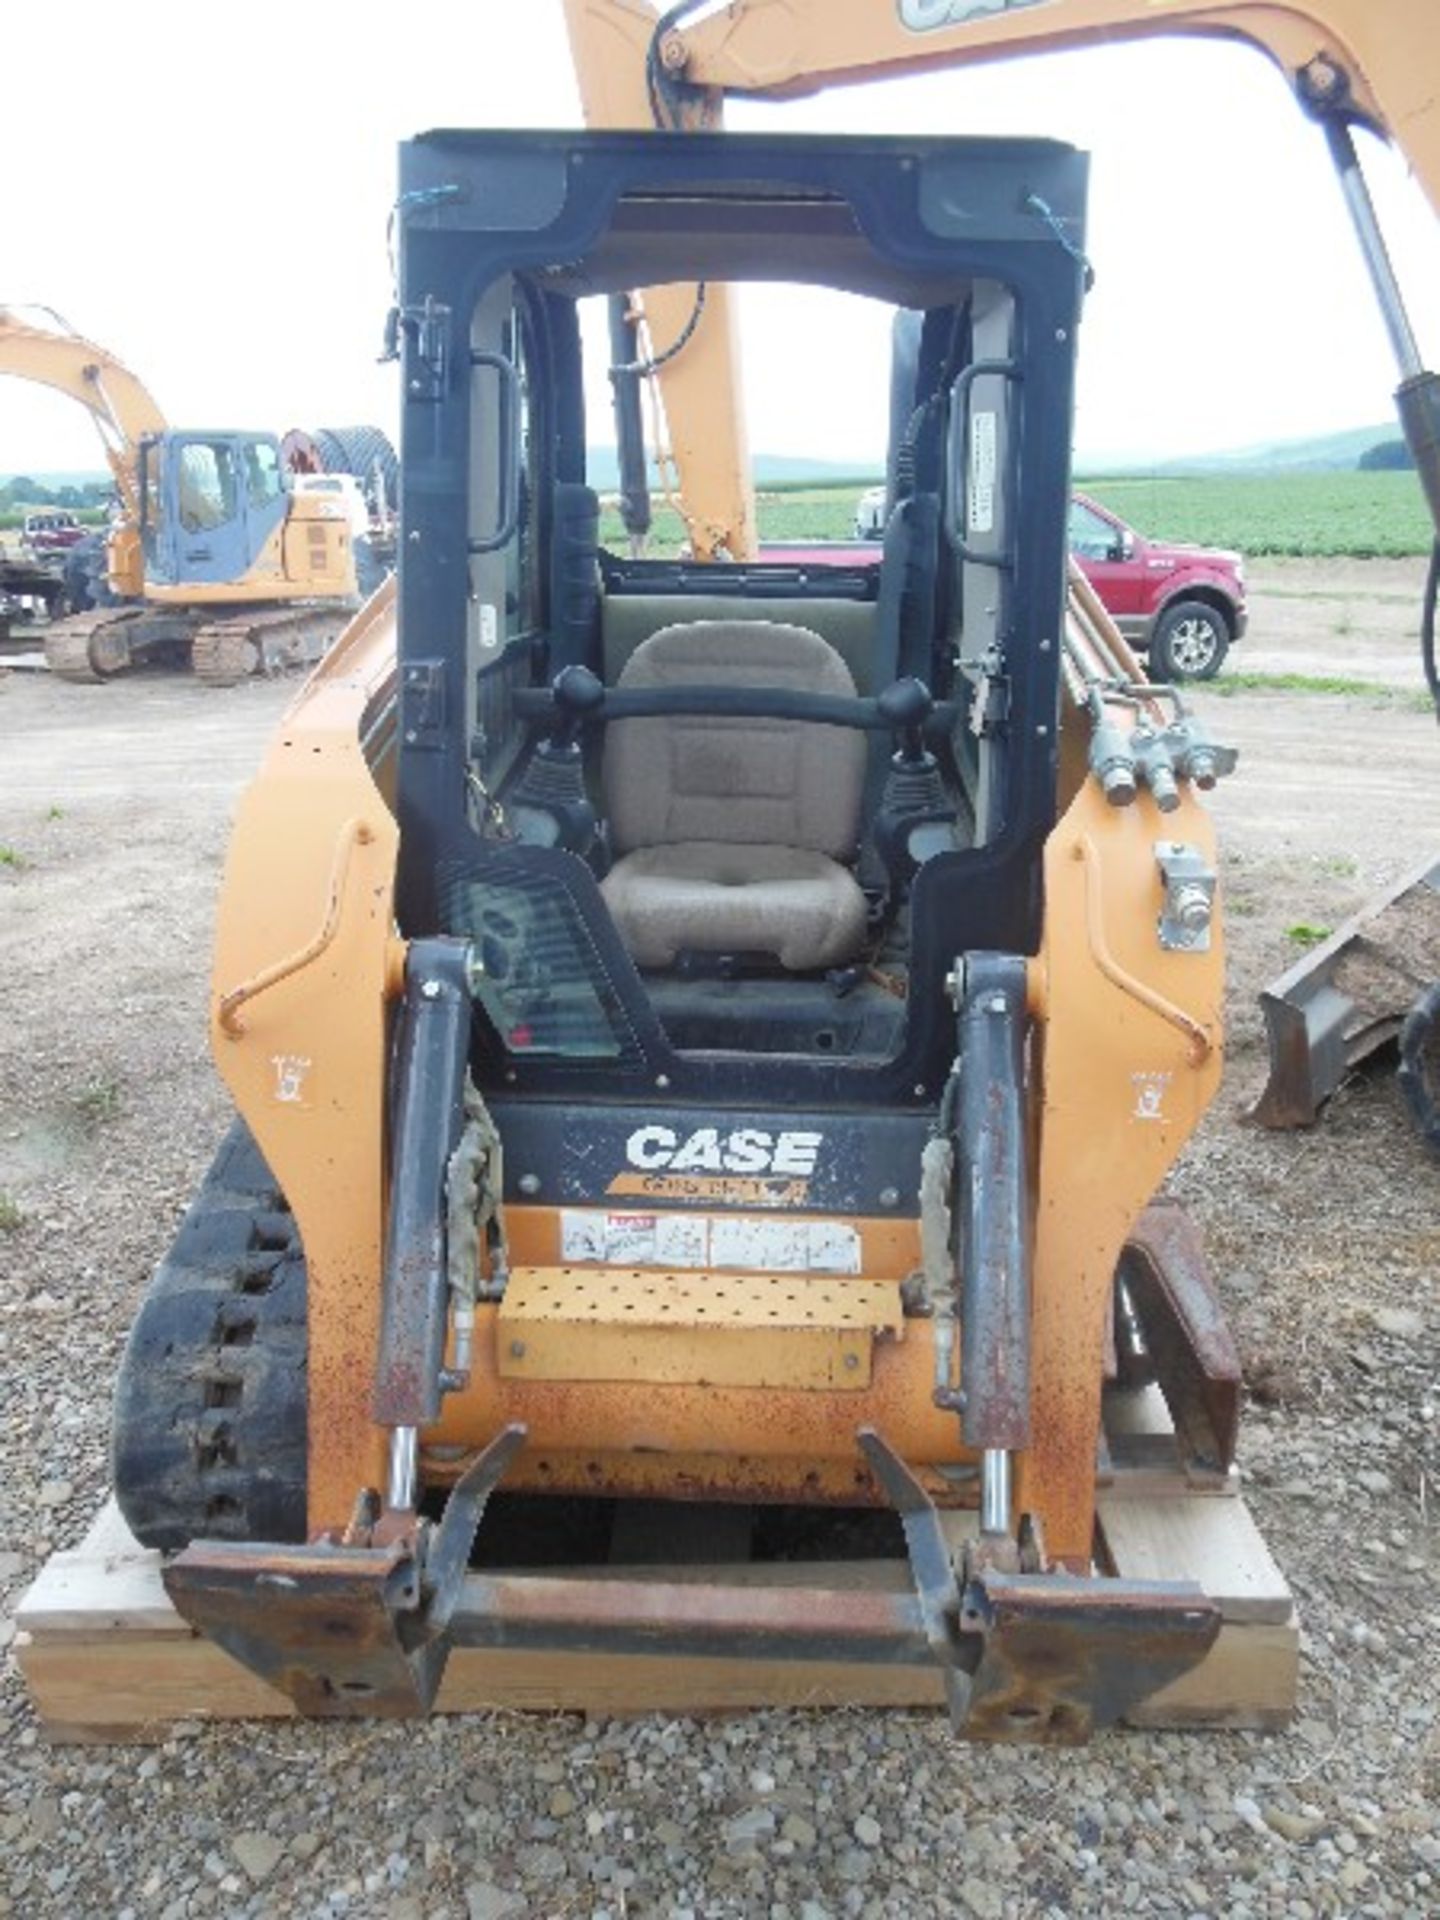 2012 Case Compact Tract Loader Model TR270VCTL, S/N JAFTR270HCM460266, Missing Front Door, Front - Image 2 of 3